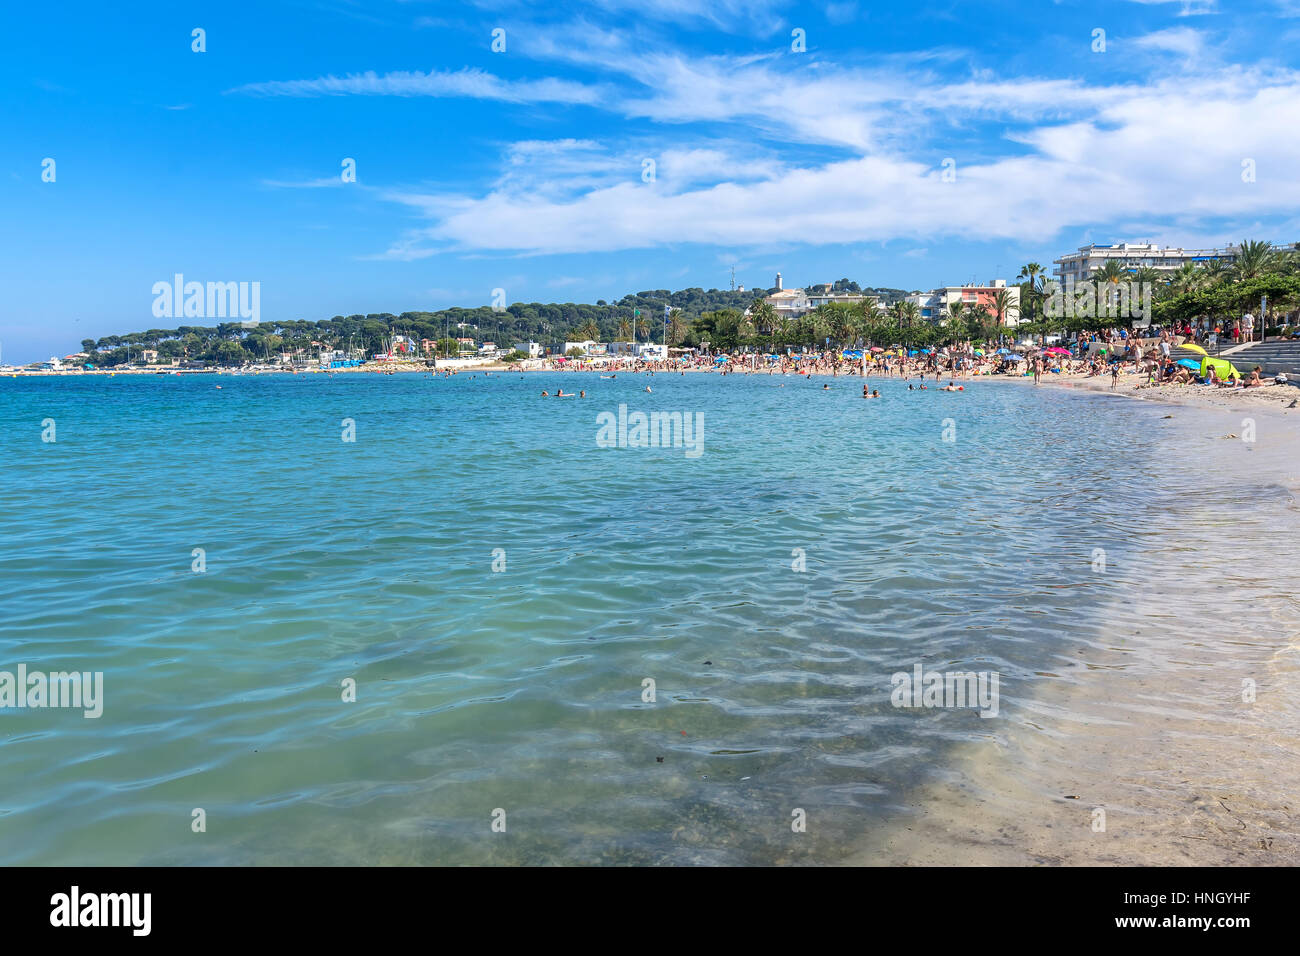 Antibes, France - June 26, 2016: people subathing on Plage du Ponteil in  Antibes. Located between old Antibes and Cap d'Antibes, it is a popular  local Stock Photo - Alamy